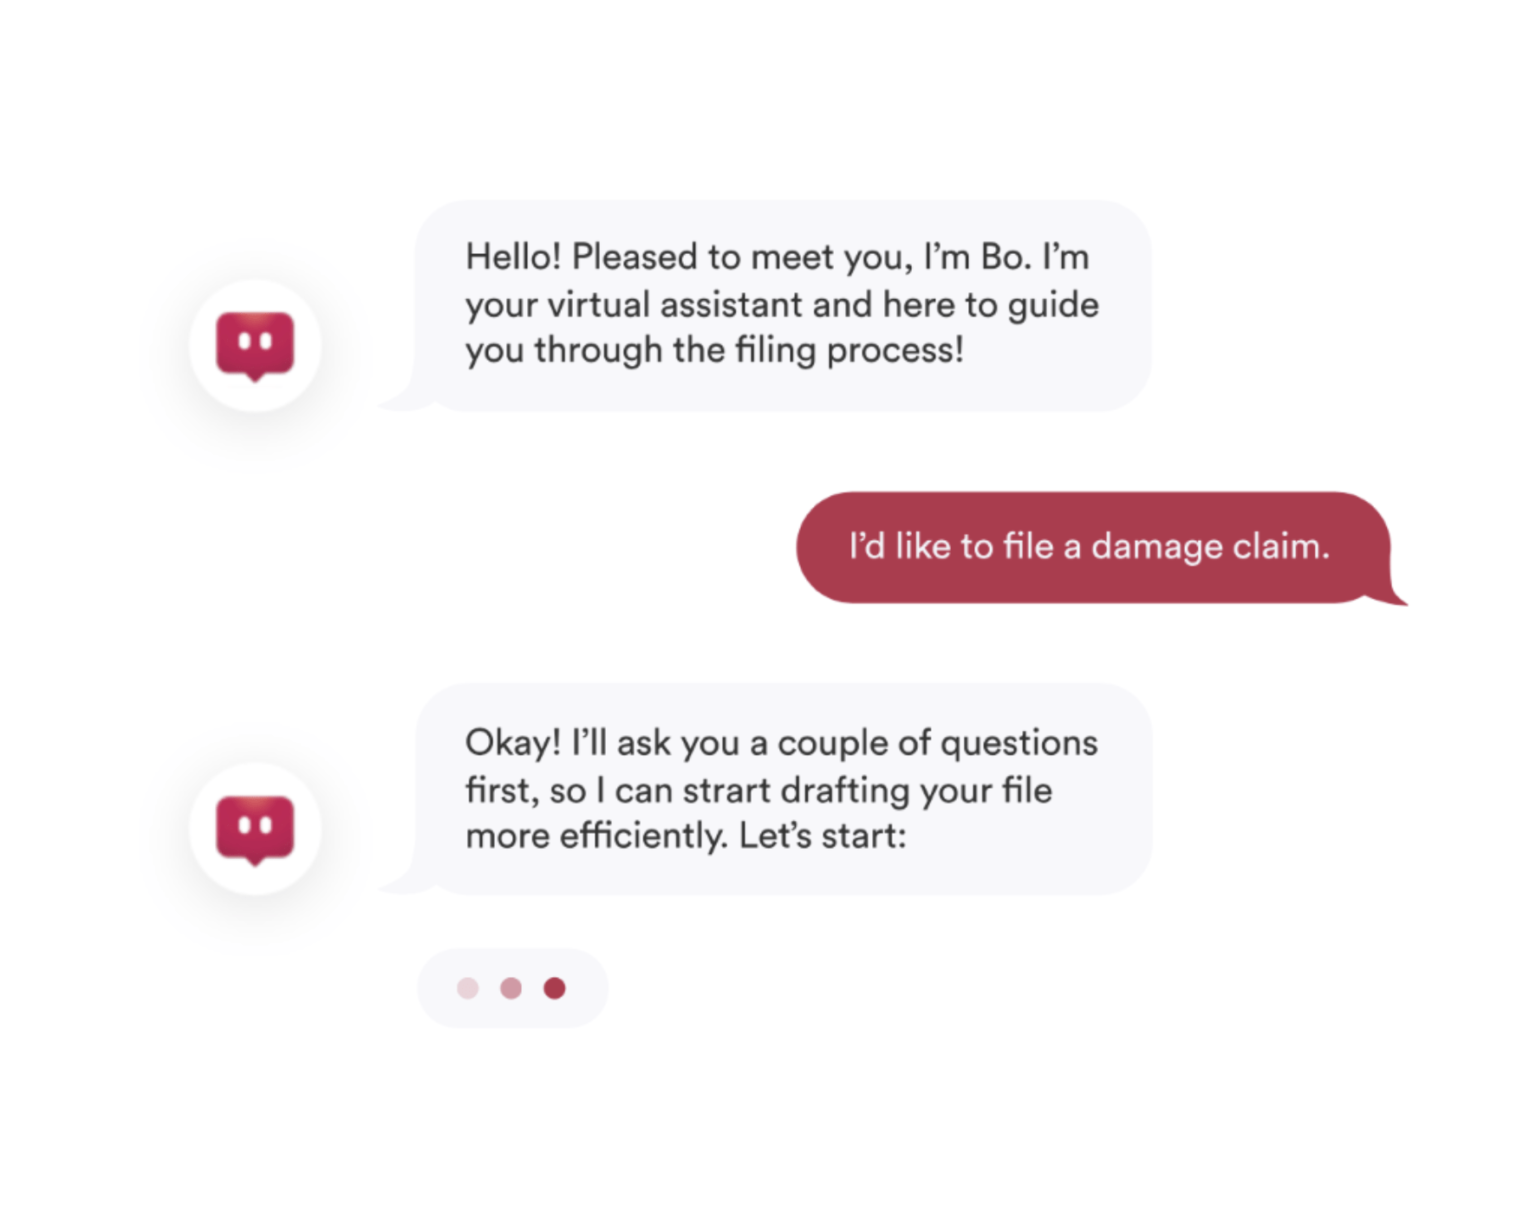 Belfius conversational banking example with a chatbot